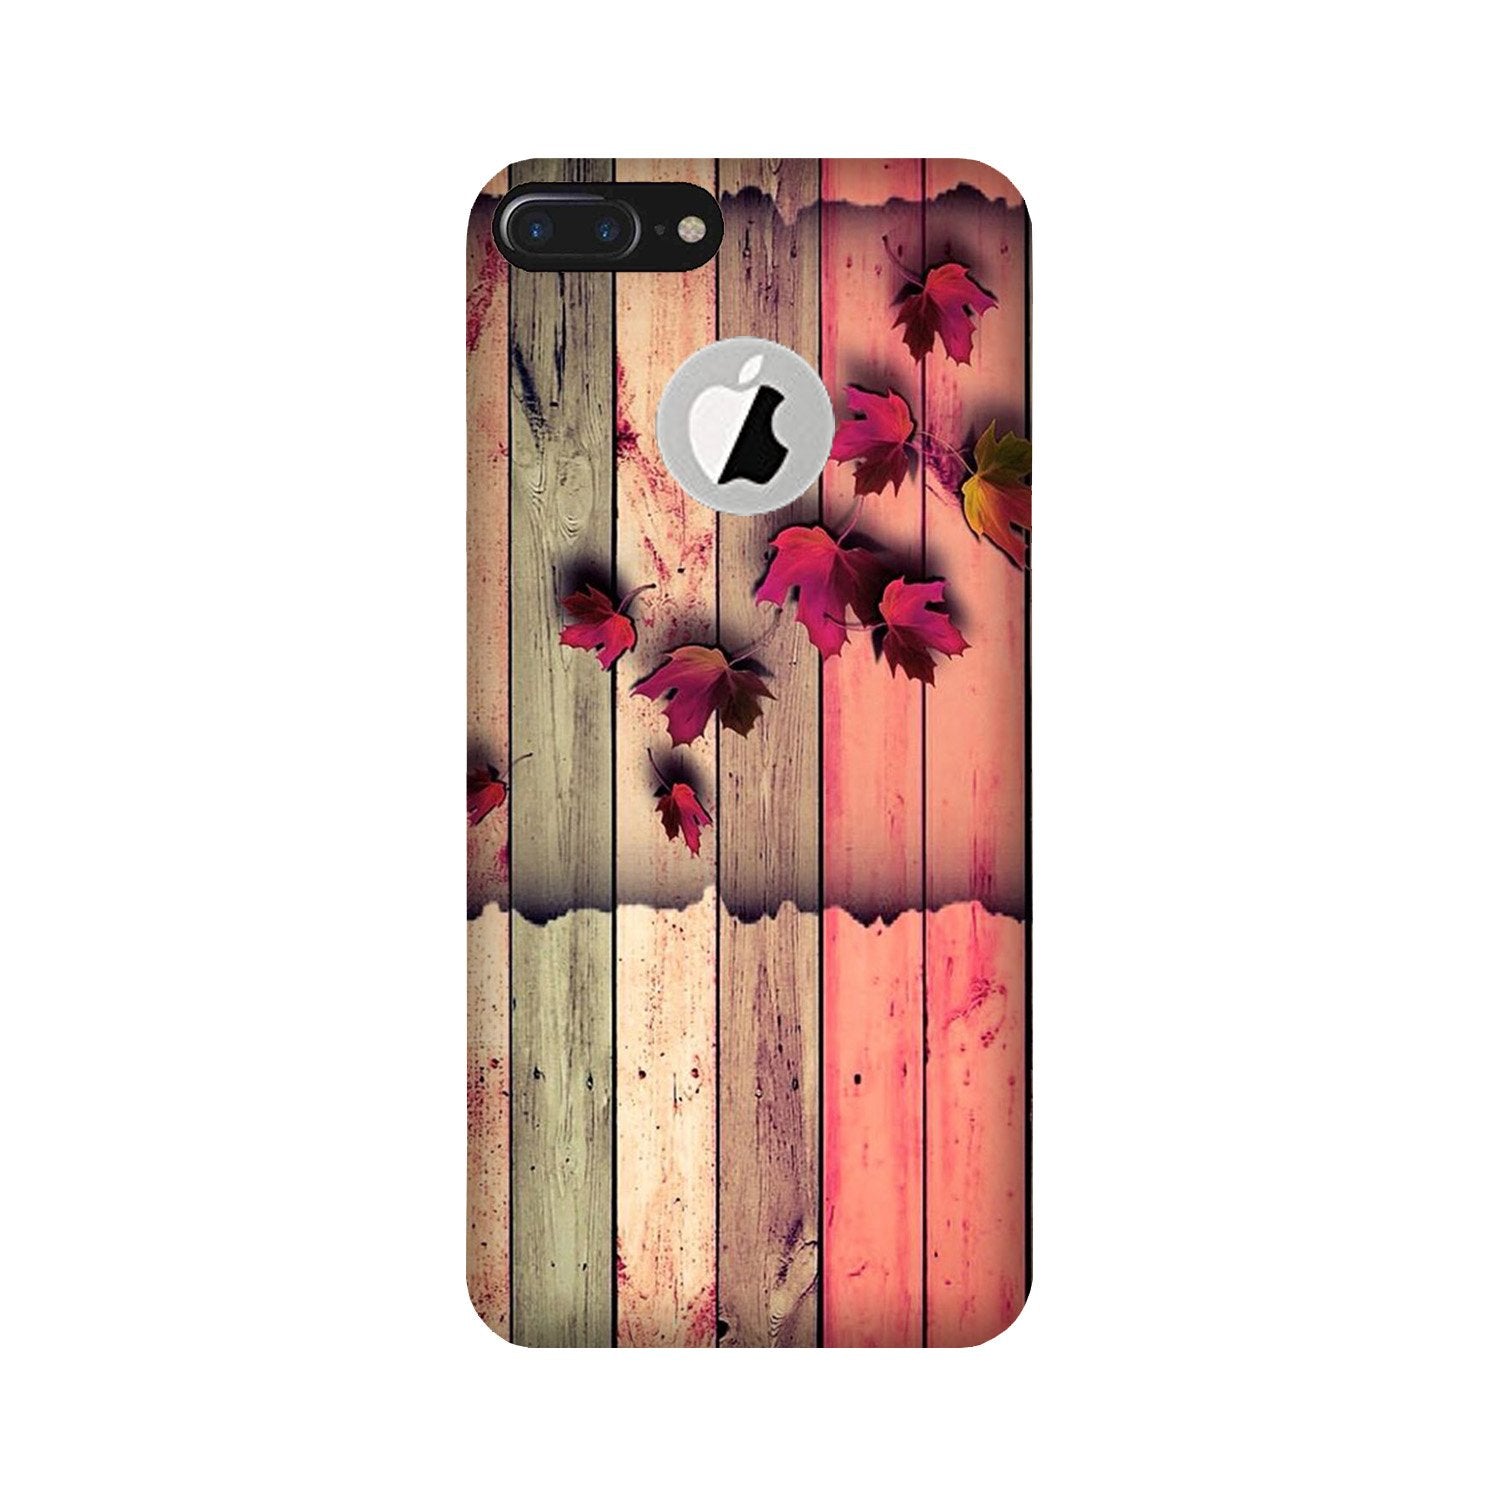 Wooden look2 Case for iPhone 7 Plus logo cut